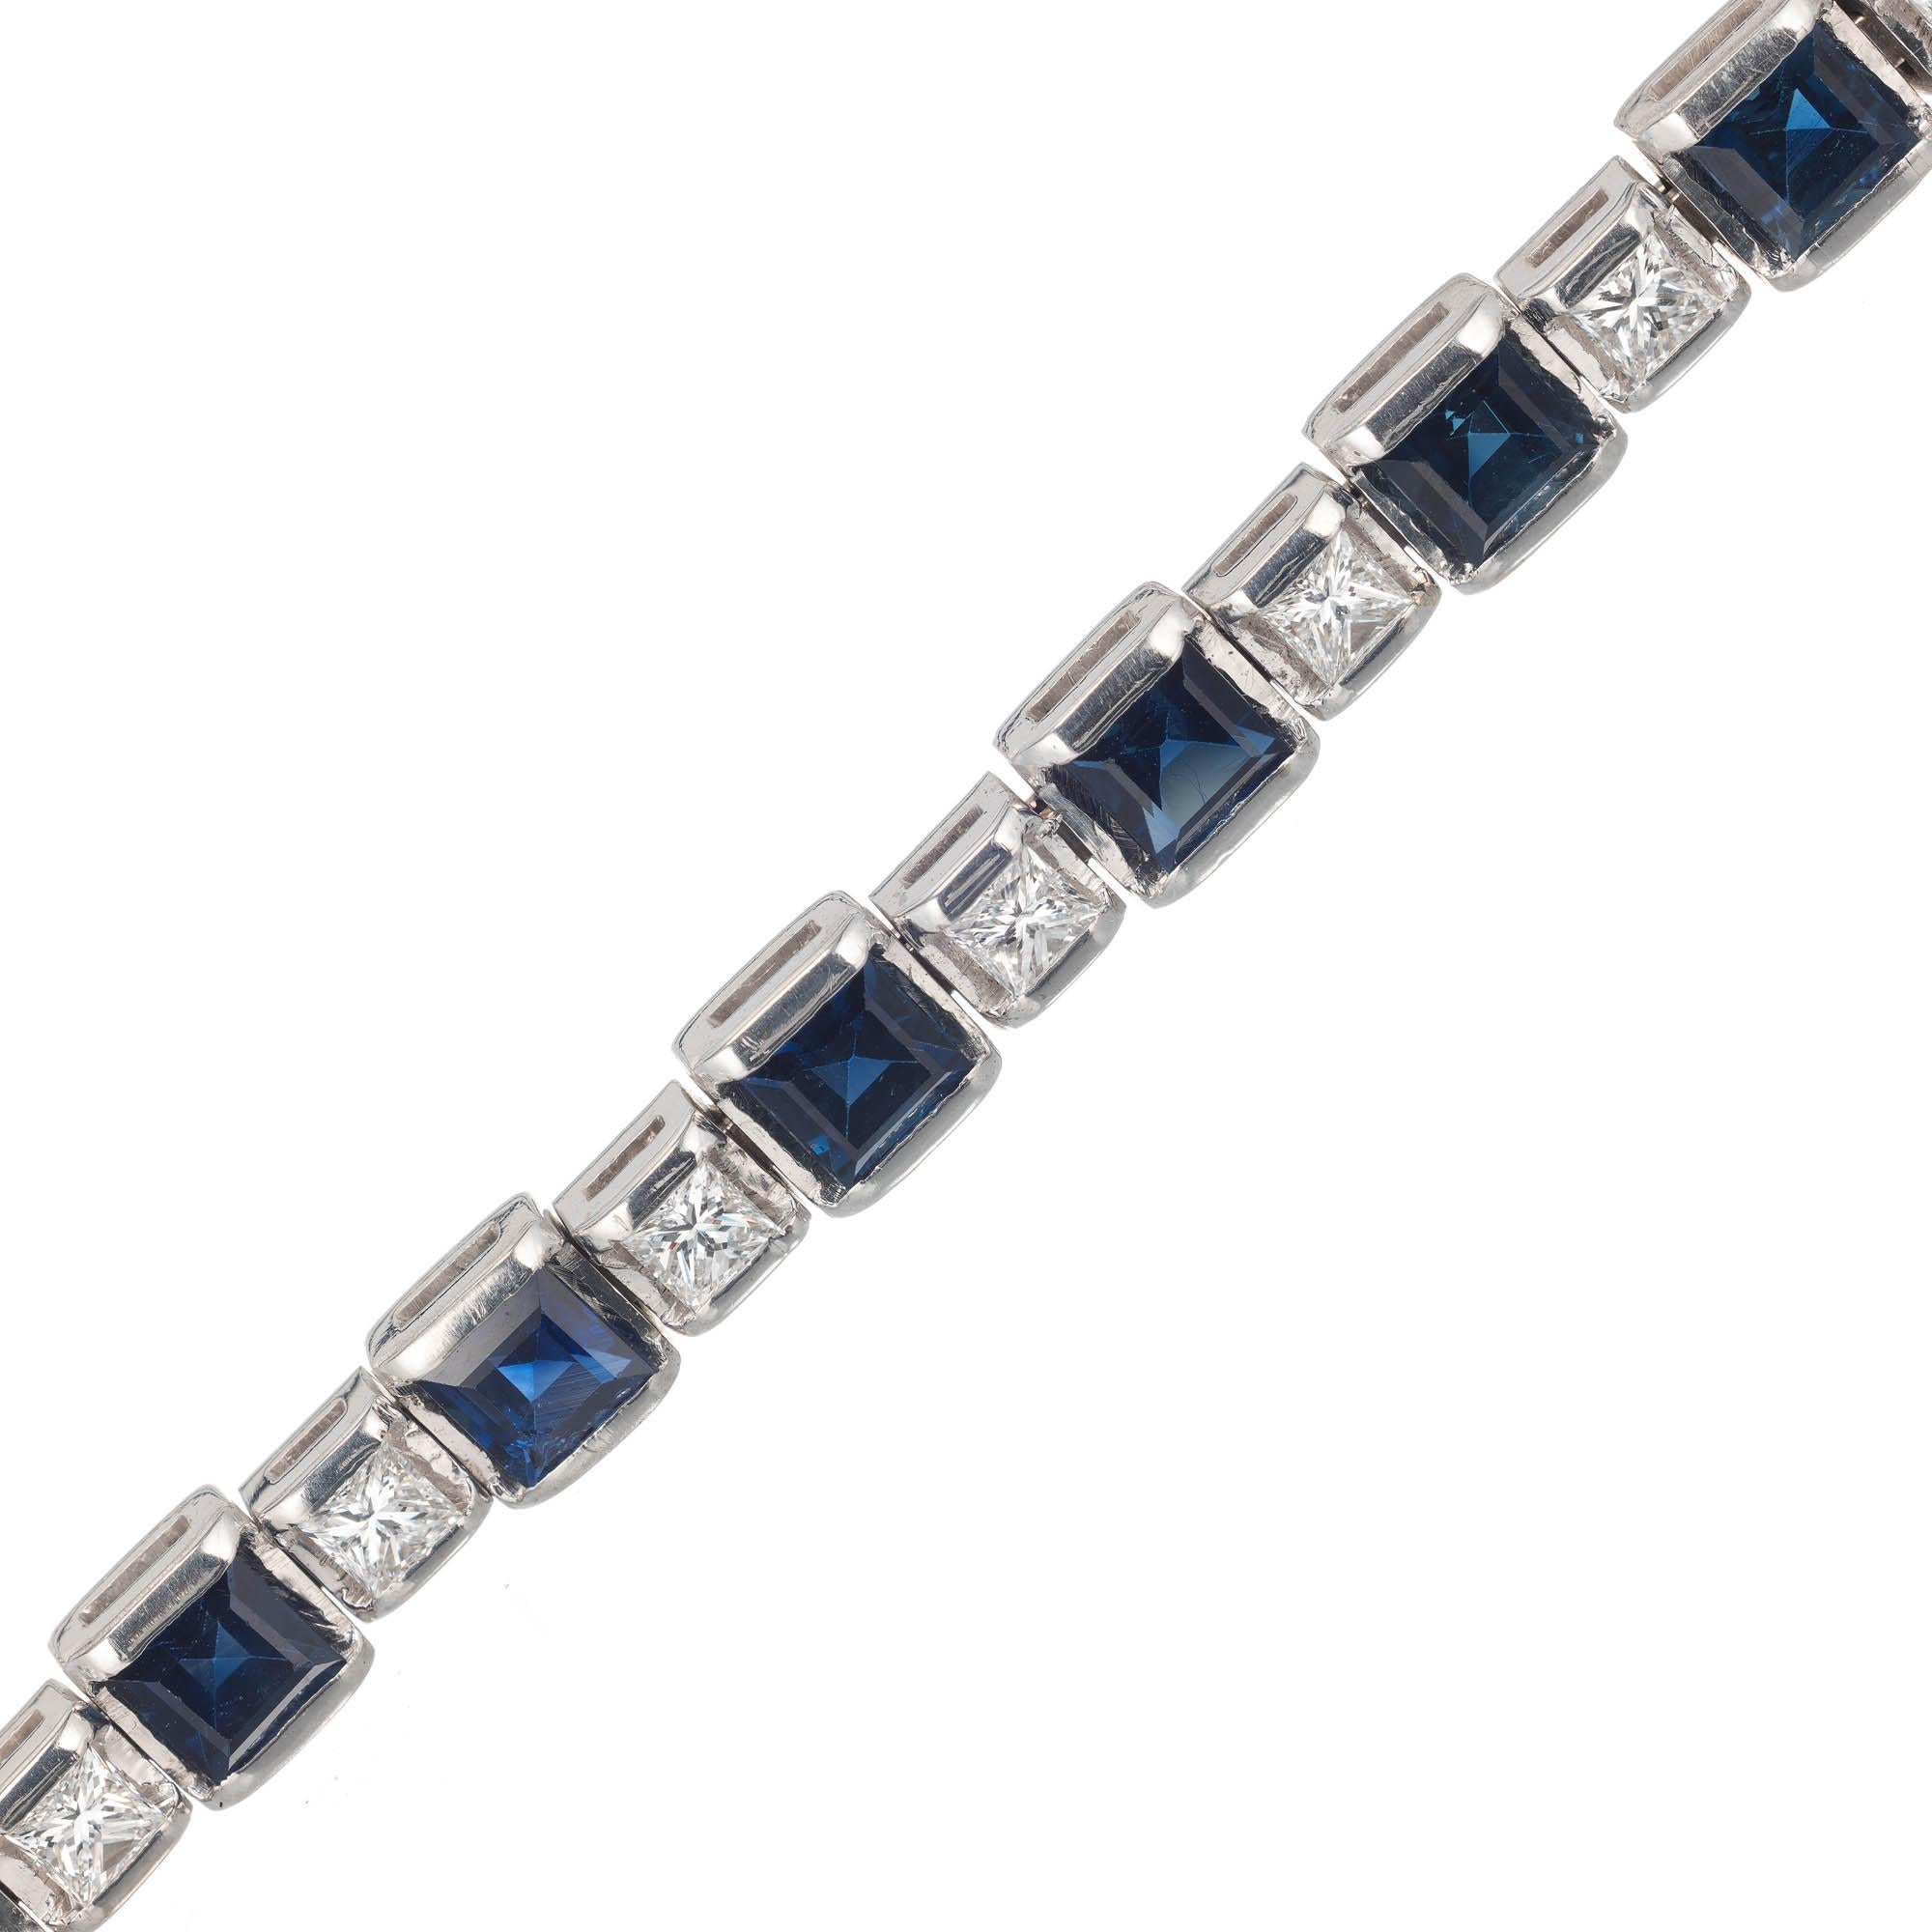  Hinged link square blue Sapphire and bright white sparkly Princess cut Diamonds 14k white gold bracelet. Bar set, no prongs to catch.

18 square fine bright blue Sapphires, approx. total weight 7.25cts, VS1 – SI1 
17 Princess cut Diamonds, approx.